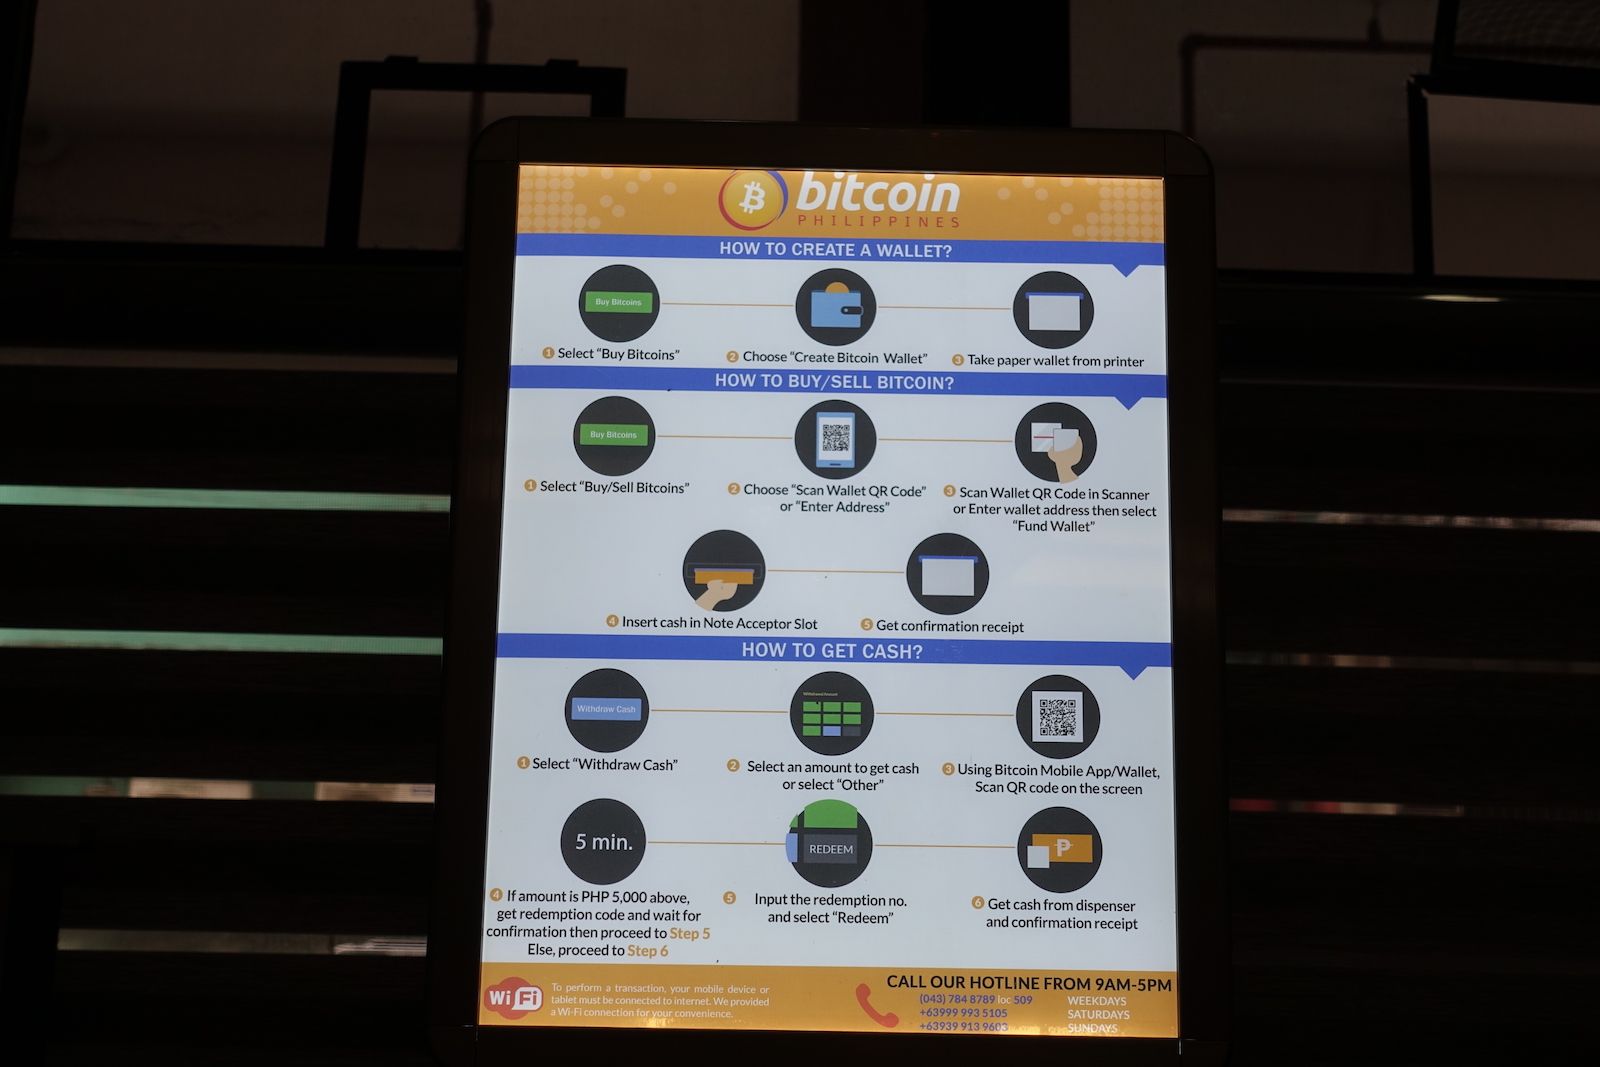 Btc Story 1 My First Meeting With A Bitcoin Atm In Makati Manila - 